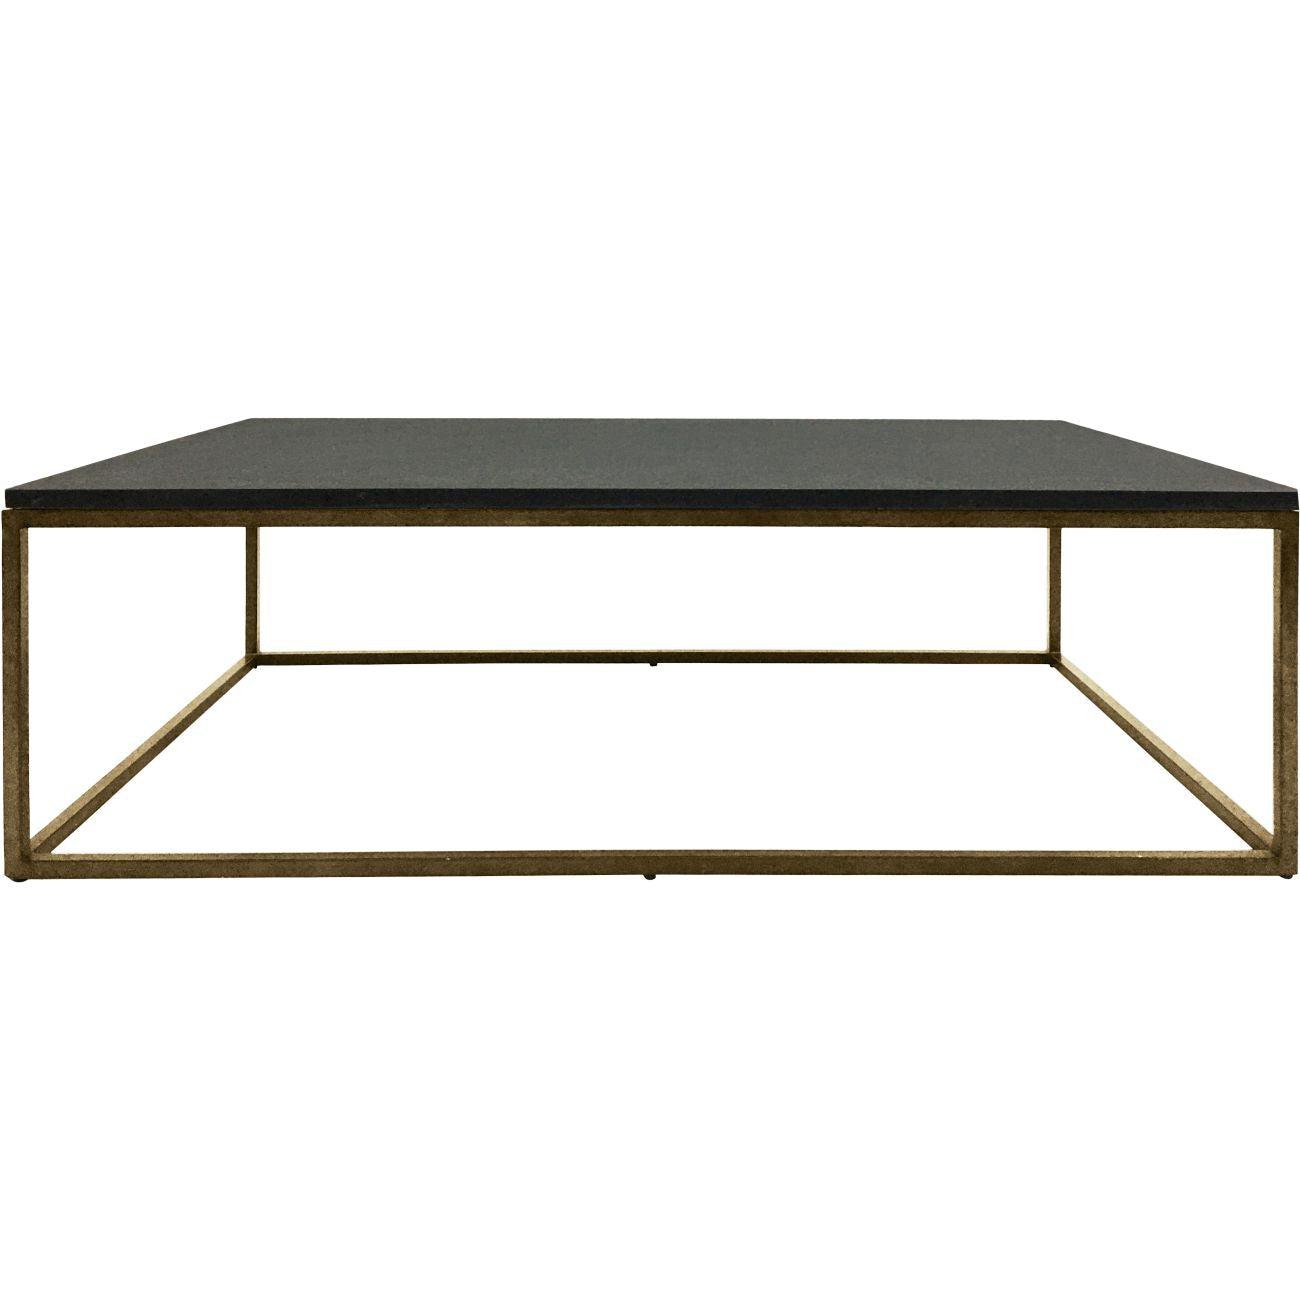 Honister Iron Coffee Table Aged Champagne Finish Galaxy Slate Top Large-Beaumonde